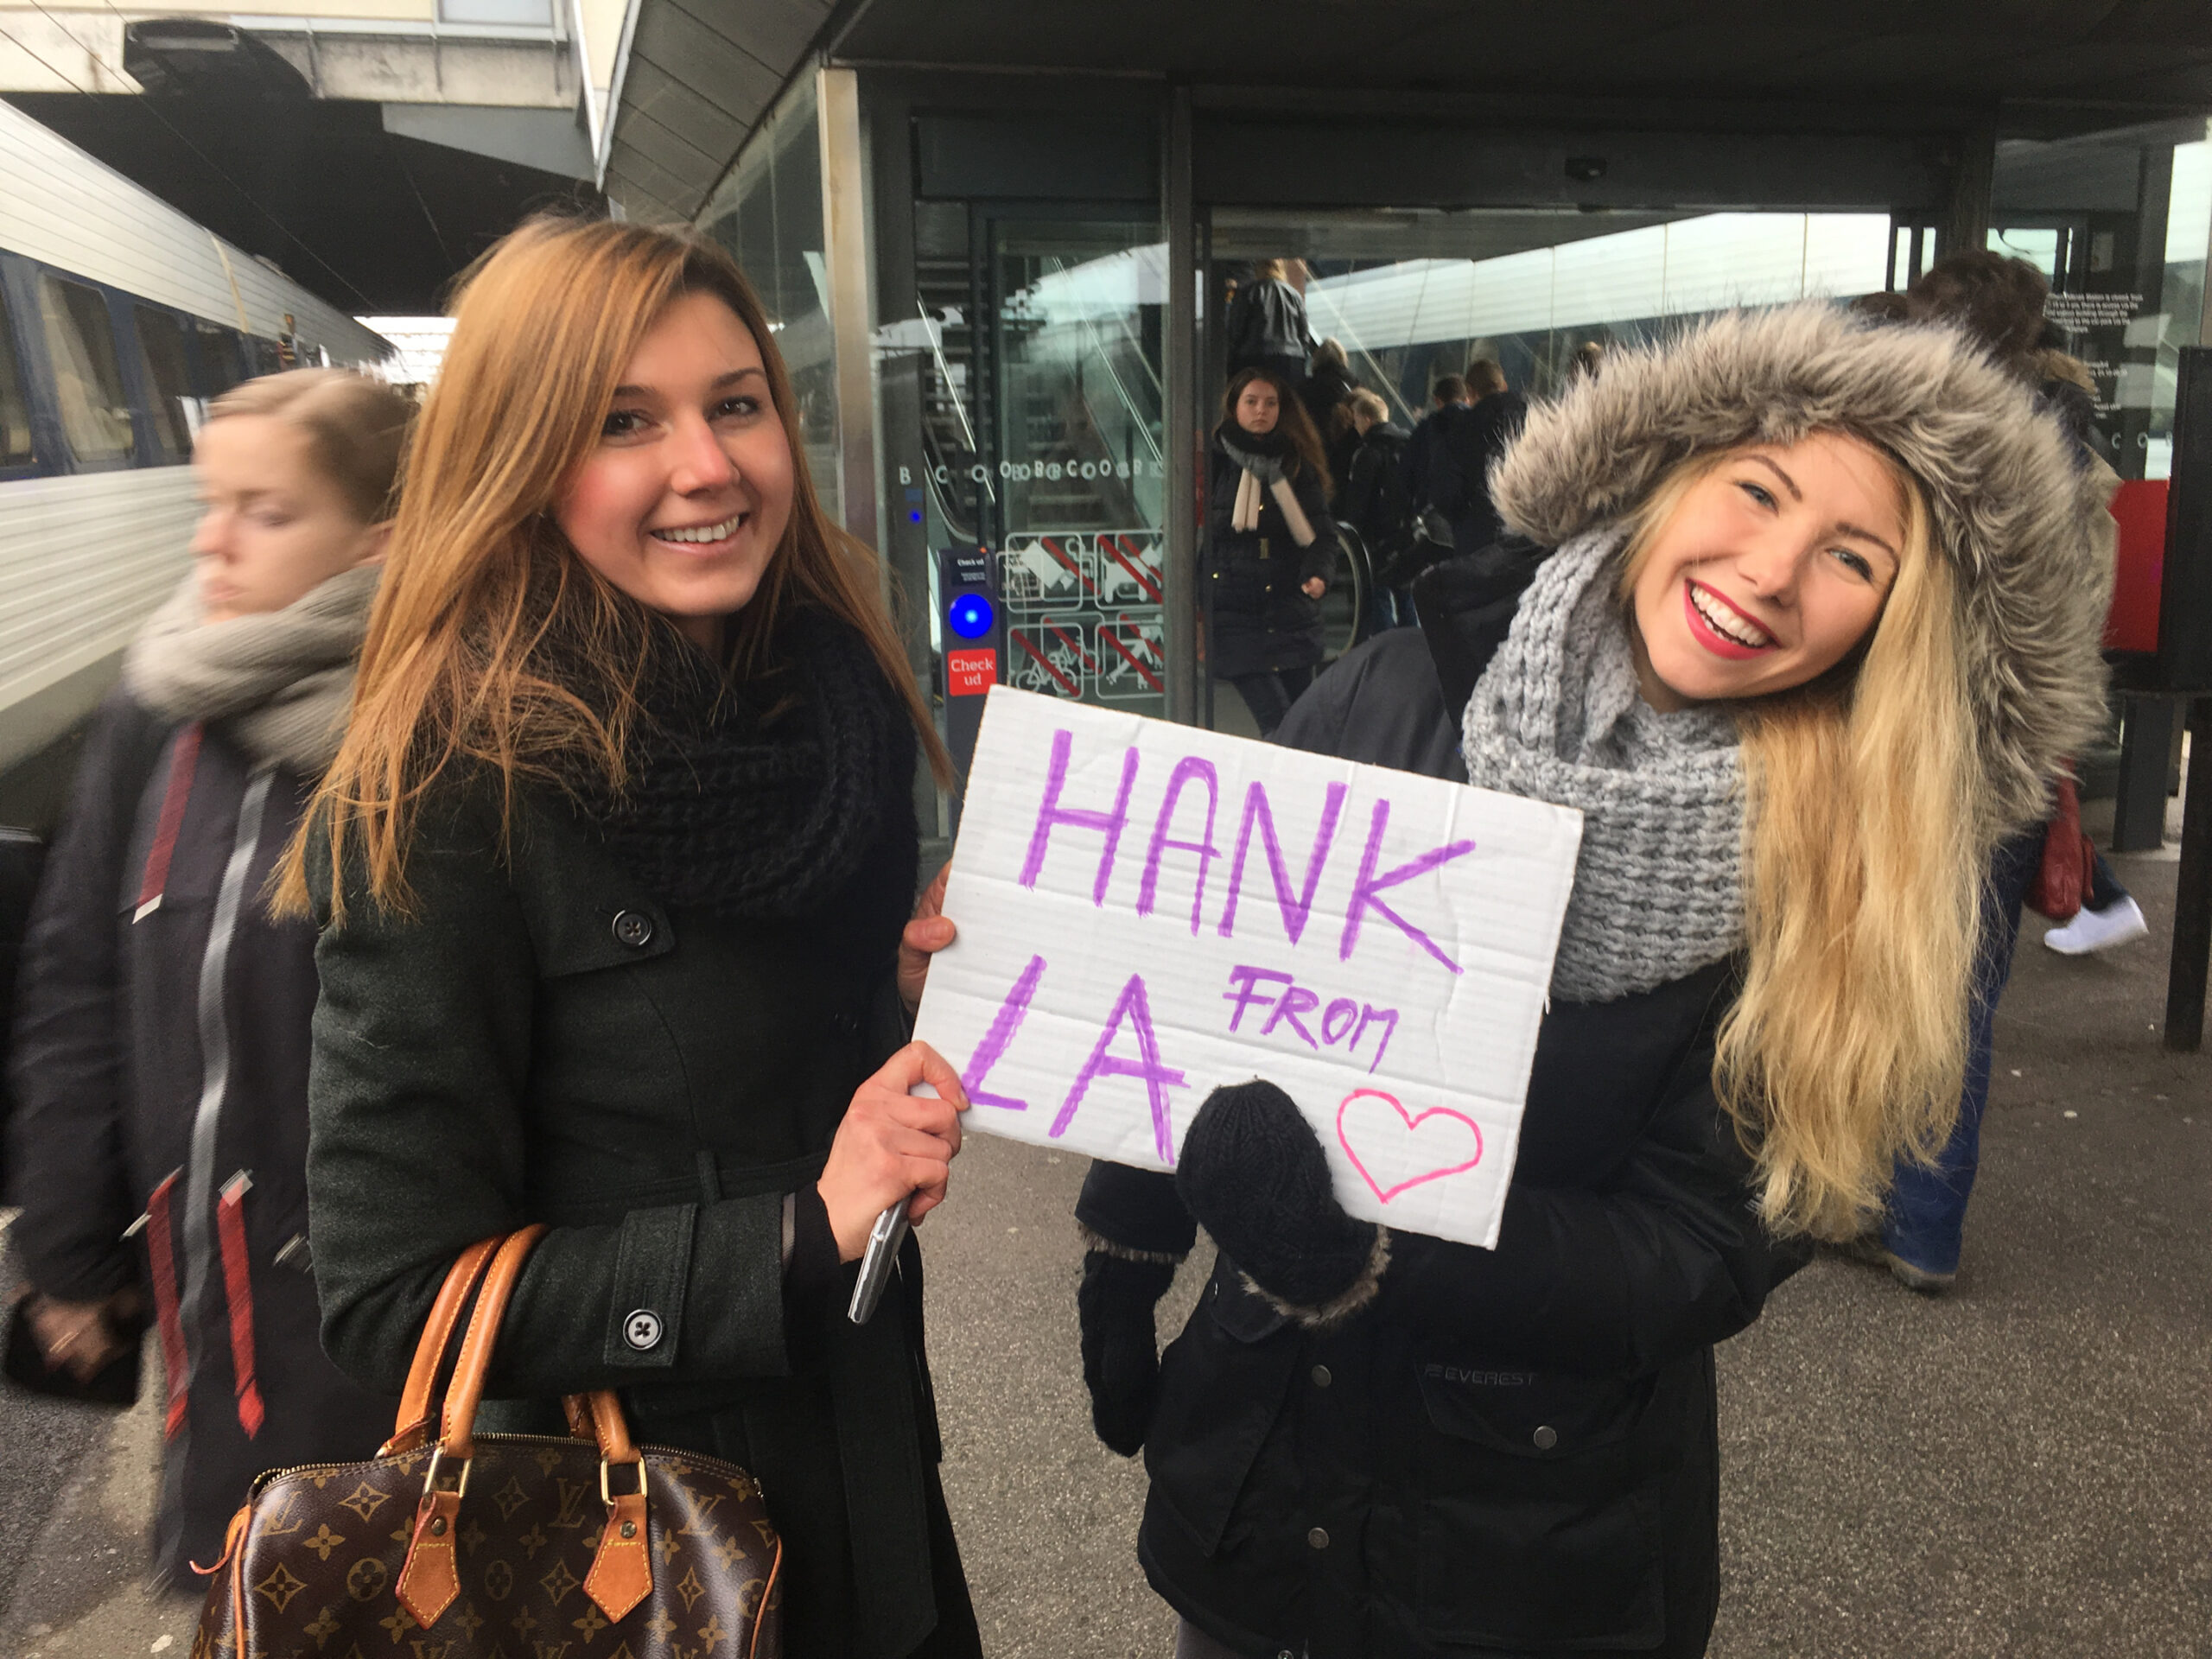 My friends Simona and Petra greet me with a sign at the train station in Odense, Denmark.